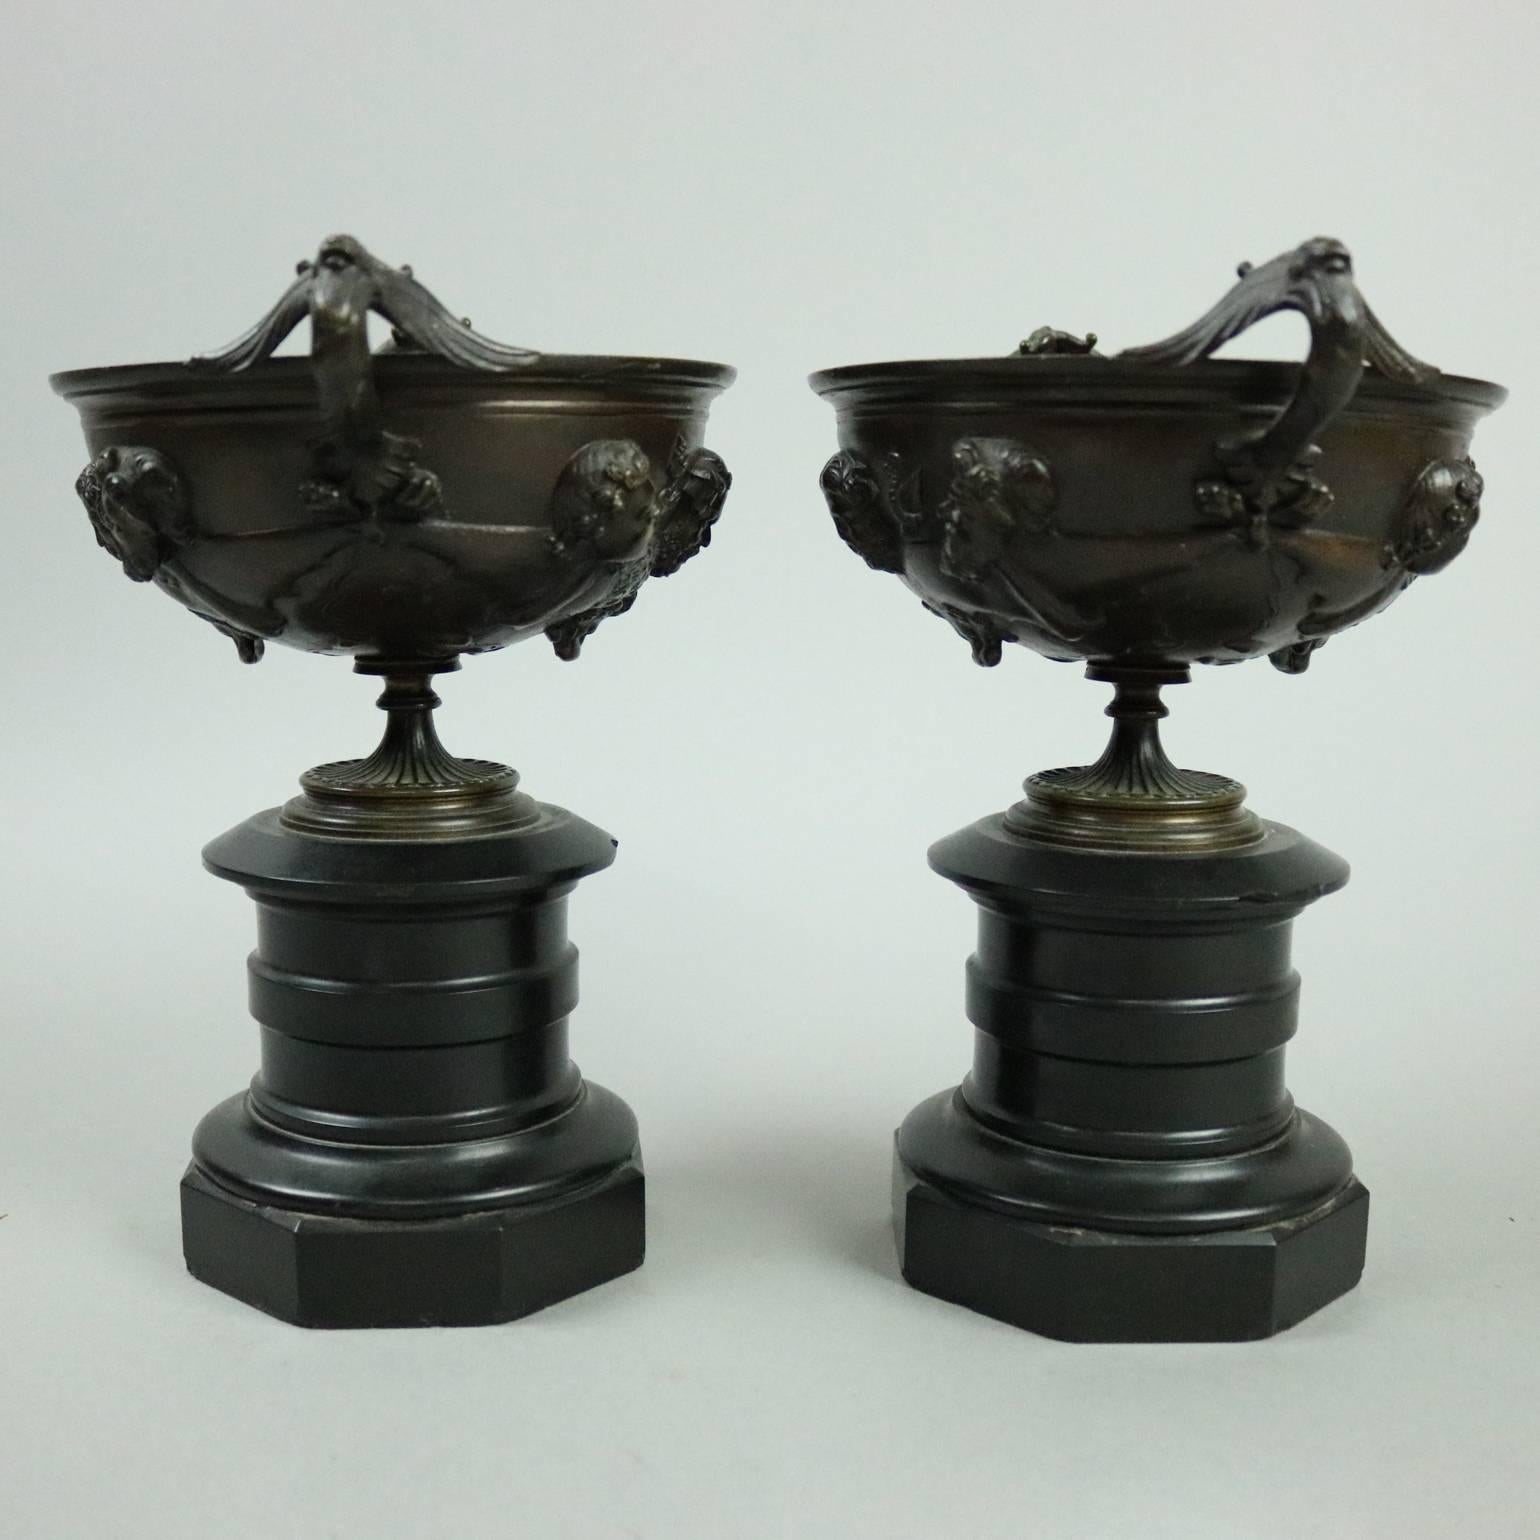 Cast Antique French Neoclassical Bronze and Marble Figural Urn Compotes, circa 1880